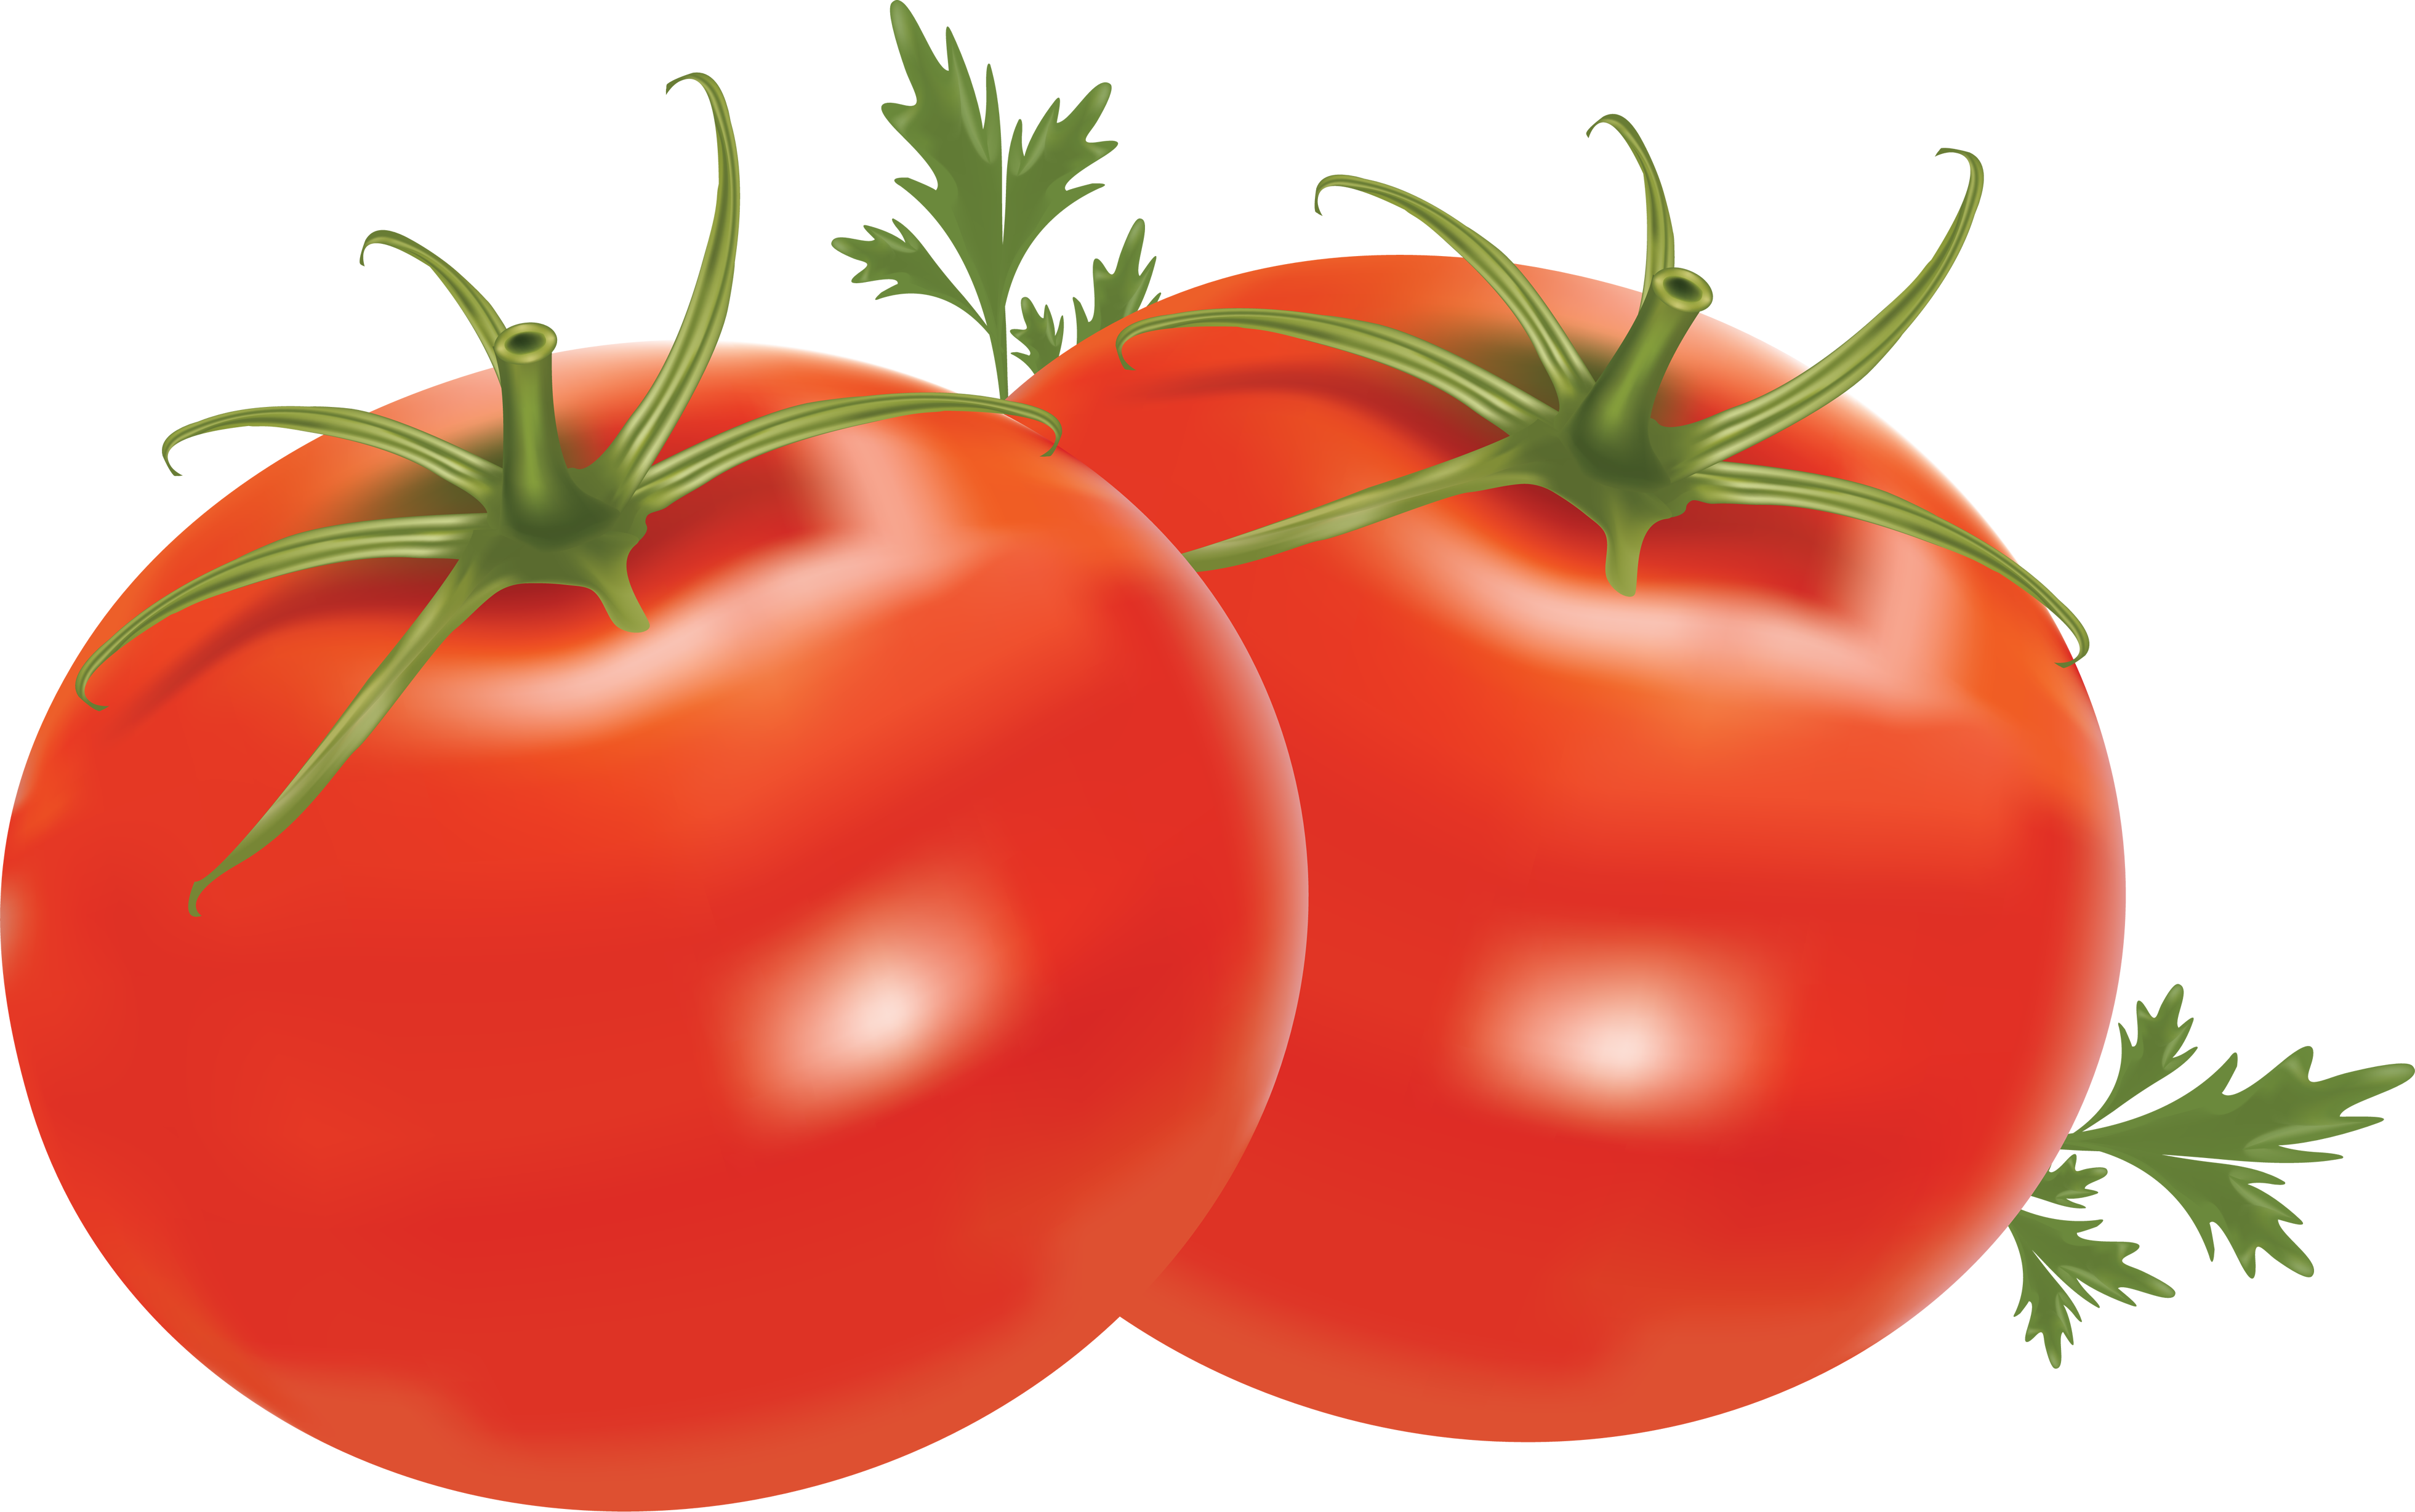 Fresh Organic Tomatoes Bunch PNG Image High Quality PNG Image